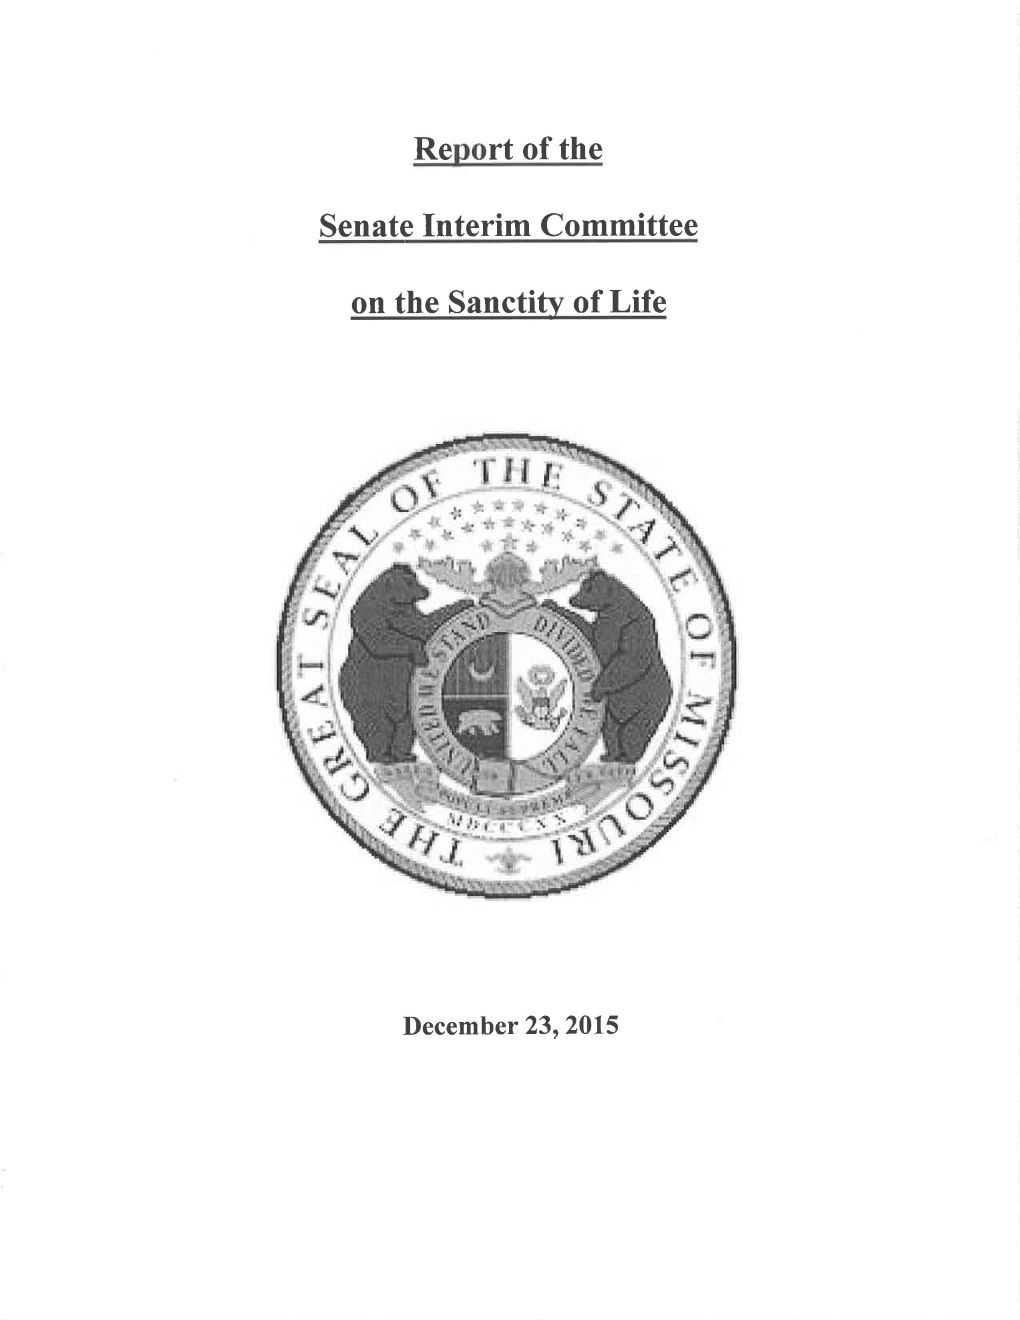 Report of the Senate Interim Committee on the Sanctity of Life